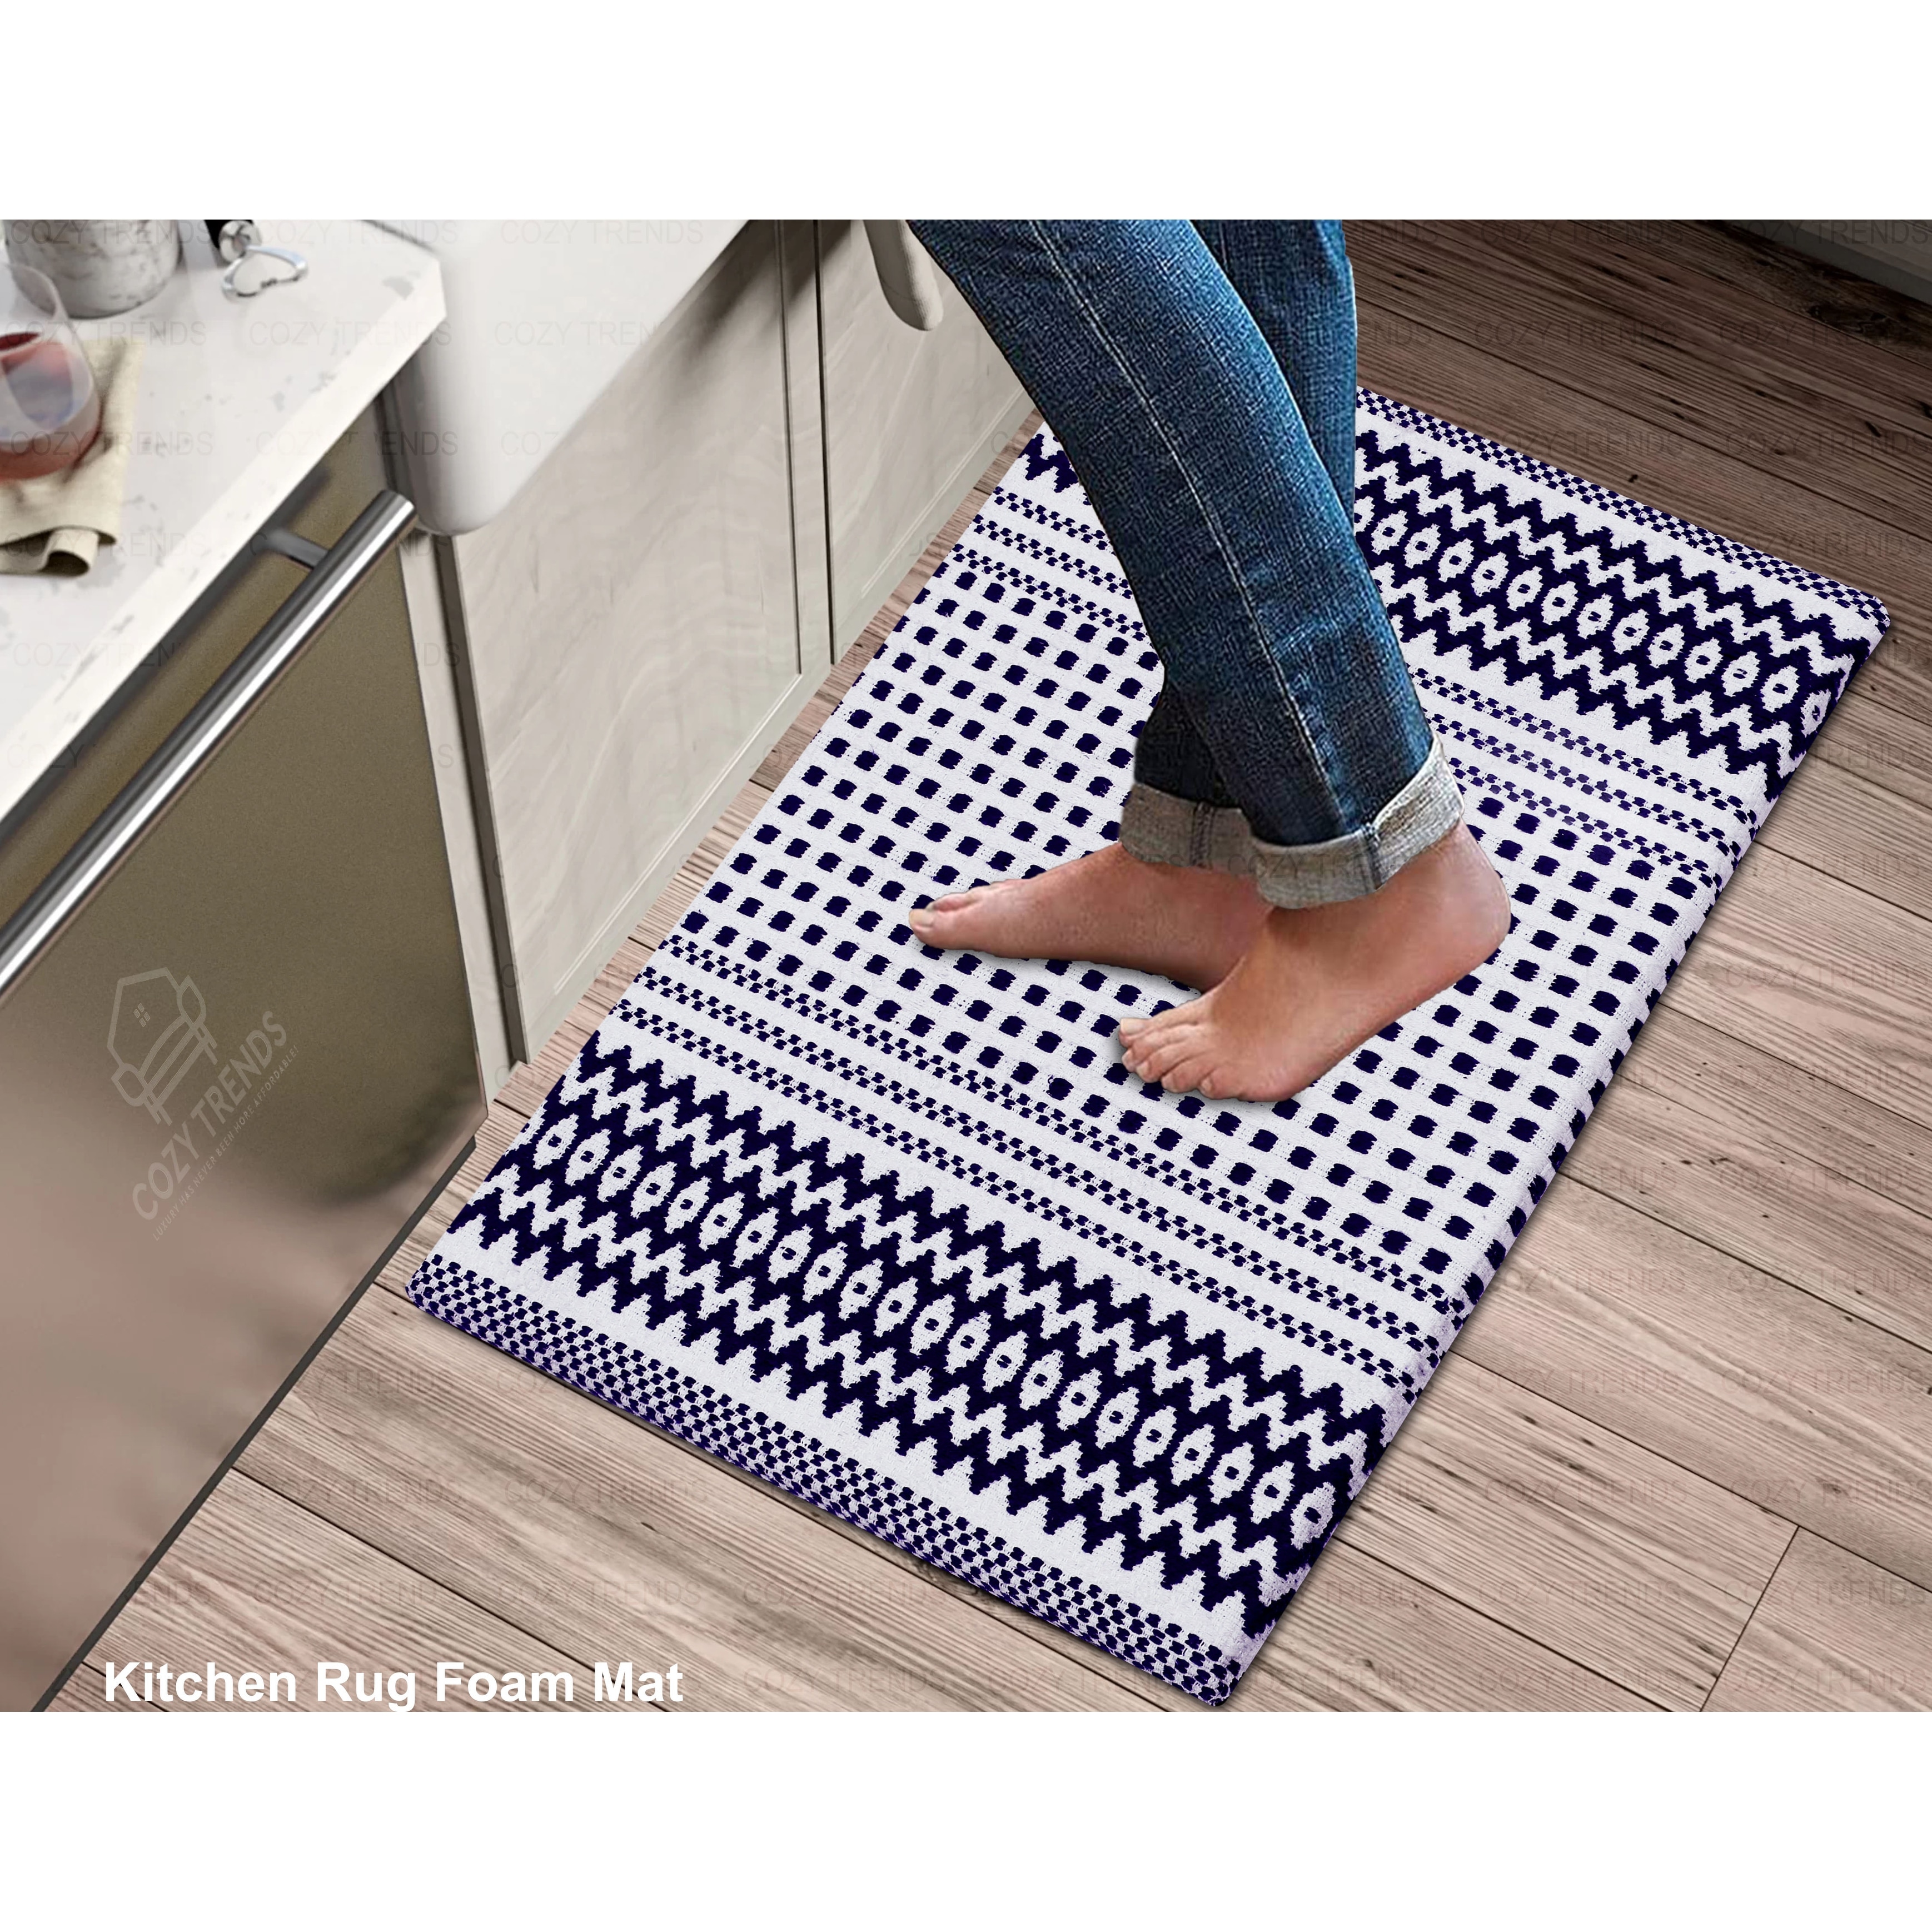 https://ak1.ostkcdn.com/images/products/is/images/direct/69a15b2efba7c31bbe7dfc95c639991aef40d779/Kitchen-Mat-Cushioned-Anti-Fatigue-Kitchen-Rug%2C-Non-Slip-Mats-Comfort-Foam-Rug-for-Kitchen%2C-Office%2C-Sink%2C-Laundry---18%27%27x30%27%27.jpg